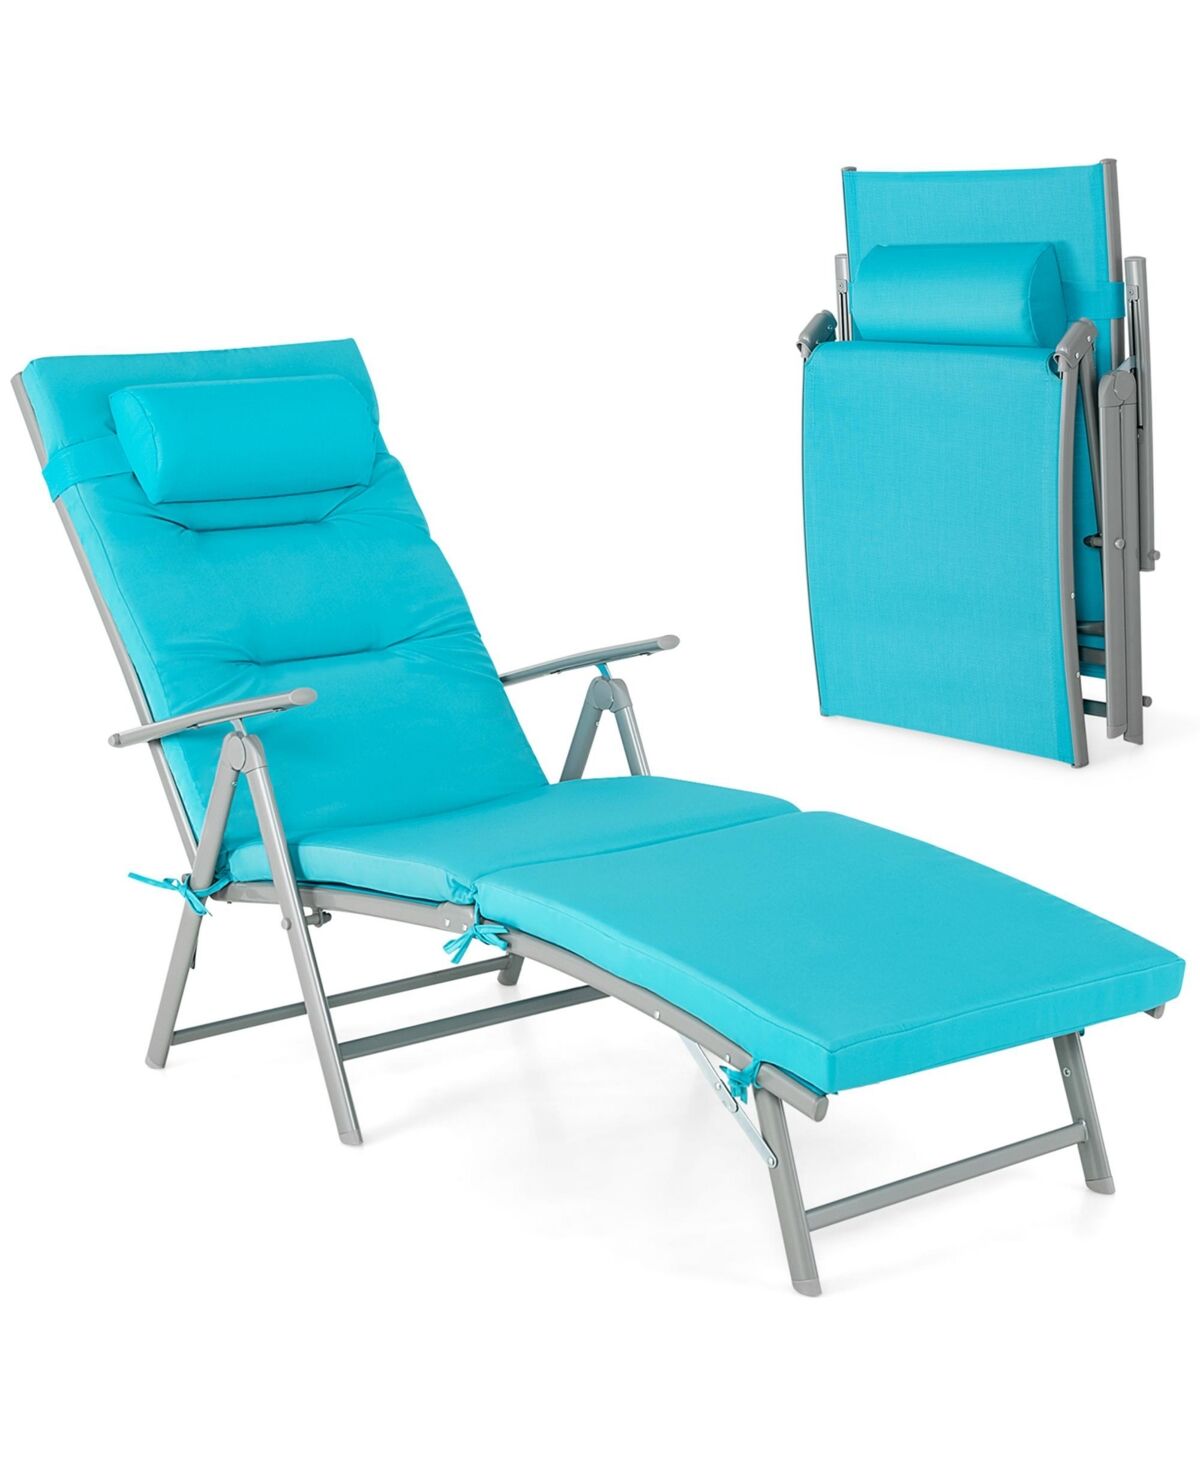 Costway Outdoor Folding Chaise Lounge Chair Recliner Cushion Pillow Adjustable - Turquoise